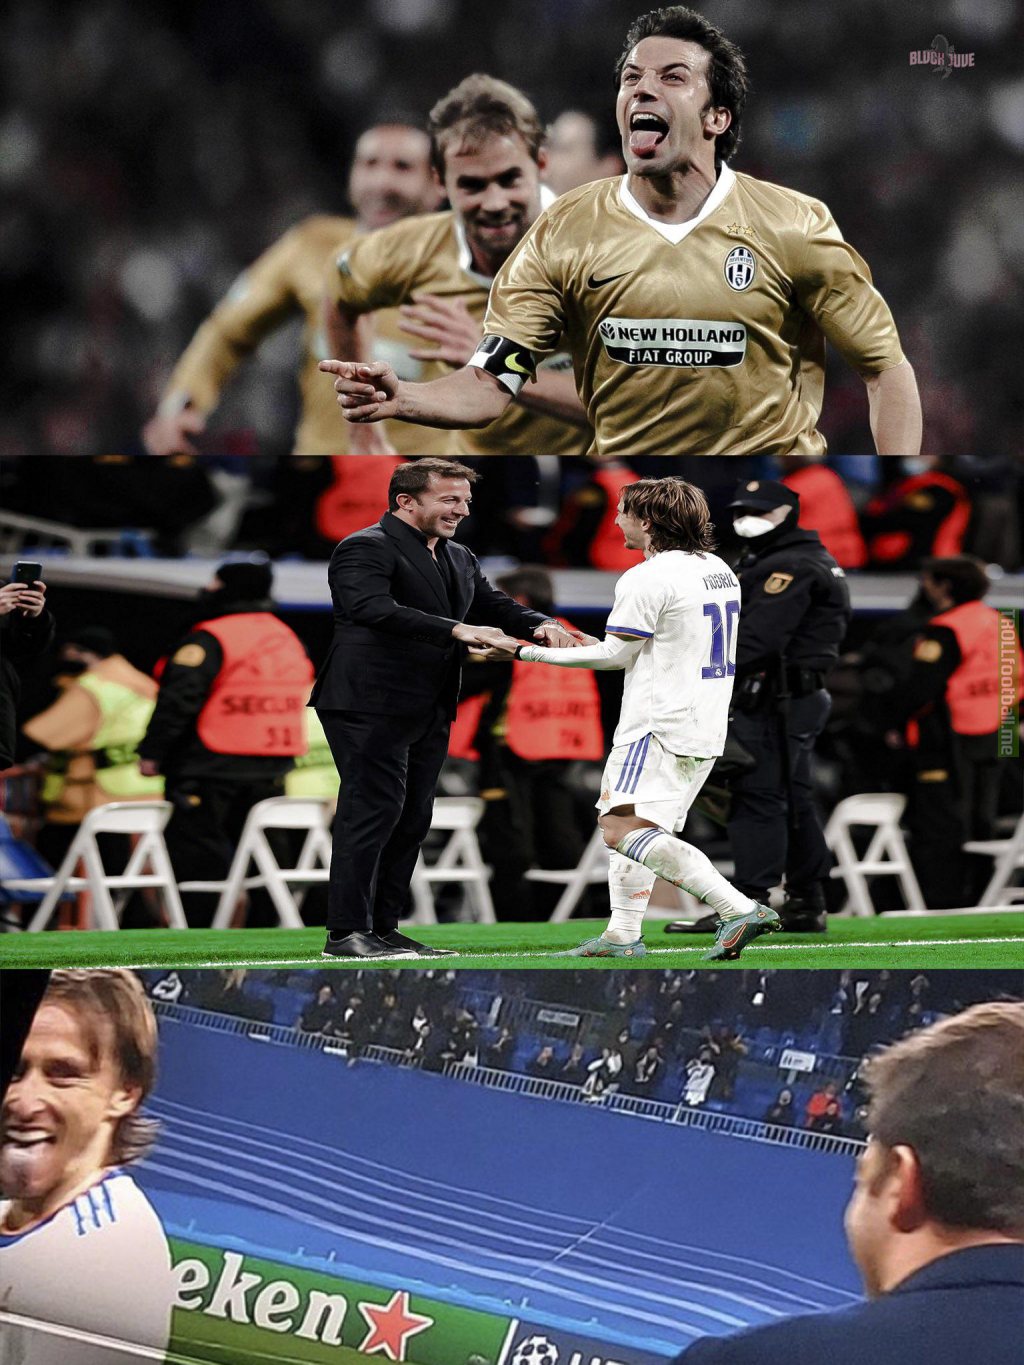 On November 5th, 2008, Alessandro Del Piero received a standing ovation in the Bernabeu after scoring a brace to beat Real Madrid 2-0. Over 13 years later Luka Modric honours Del Piero by doing his signature celebration when he meets him.